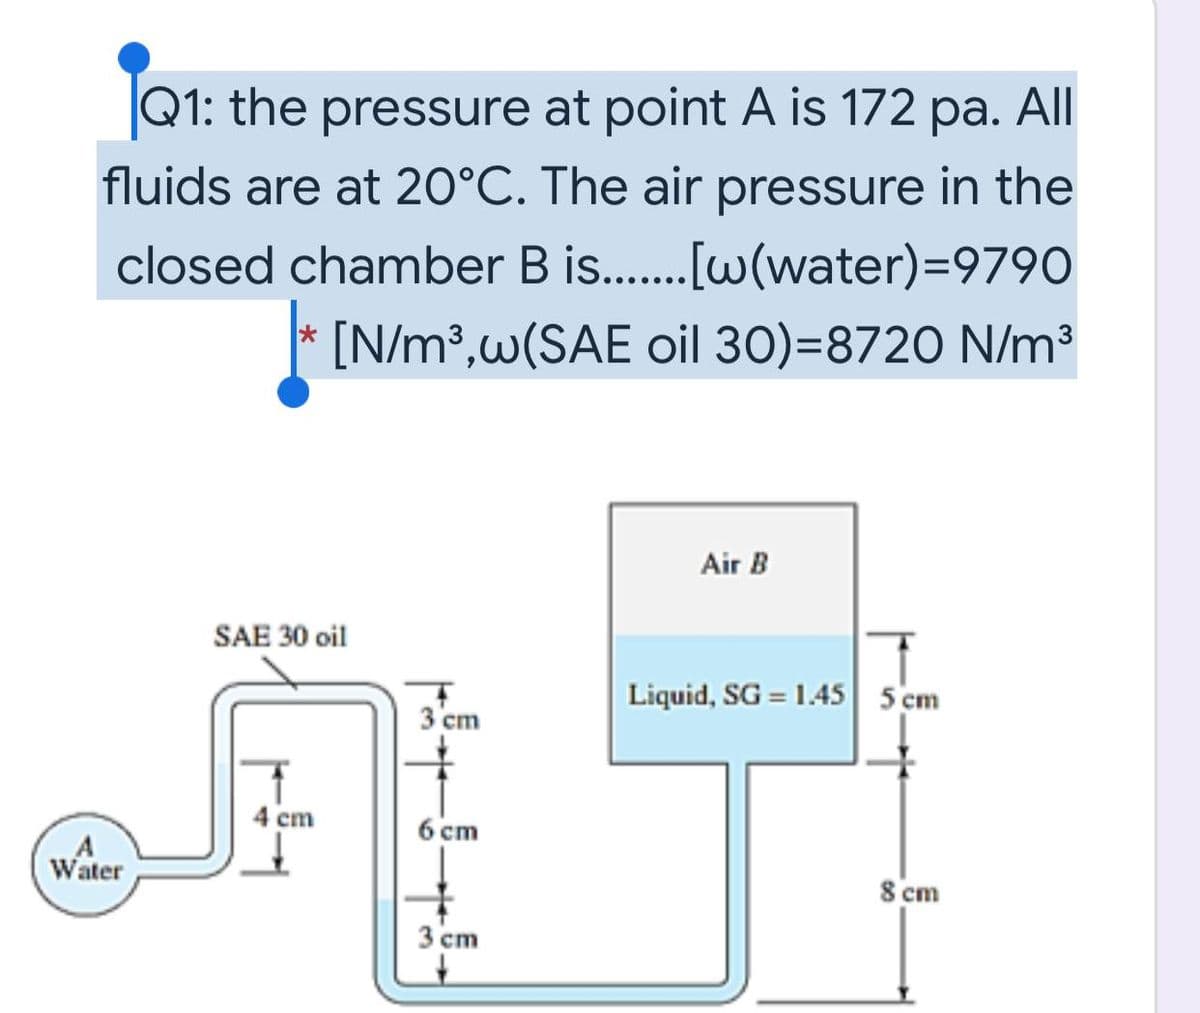 All
|Q1: the pressure at point A is 172
fluids are at 20°C. The air pressure in the
ра.
closed chamber B is..[w(water)=9790
* [N/m?,w(SAE oil 30)=8720 N/m³
Air B
SAE 30 oil
Liquid, SG = 1.45| 5 cm
3 'cm
4 cm
6 cm
Water
A
8 cm
3 cm
